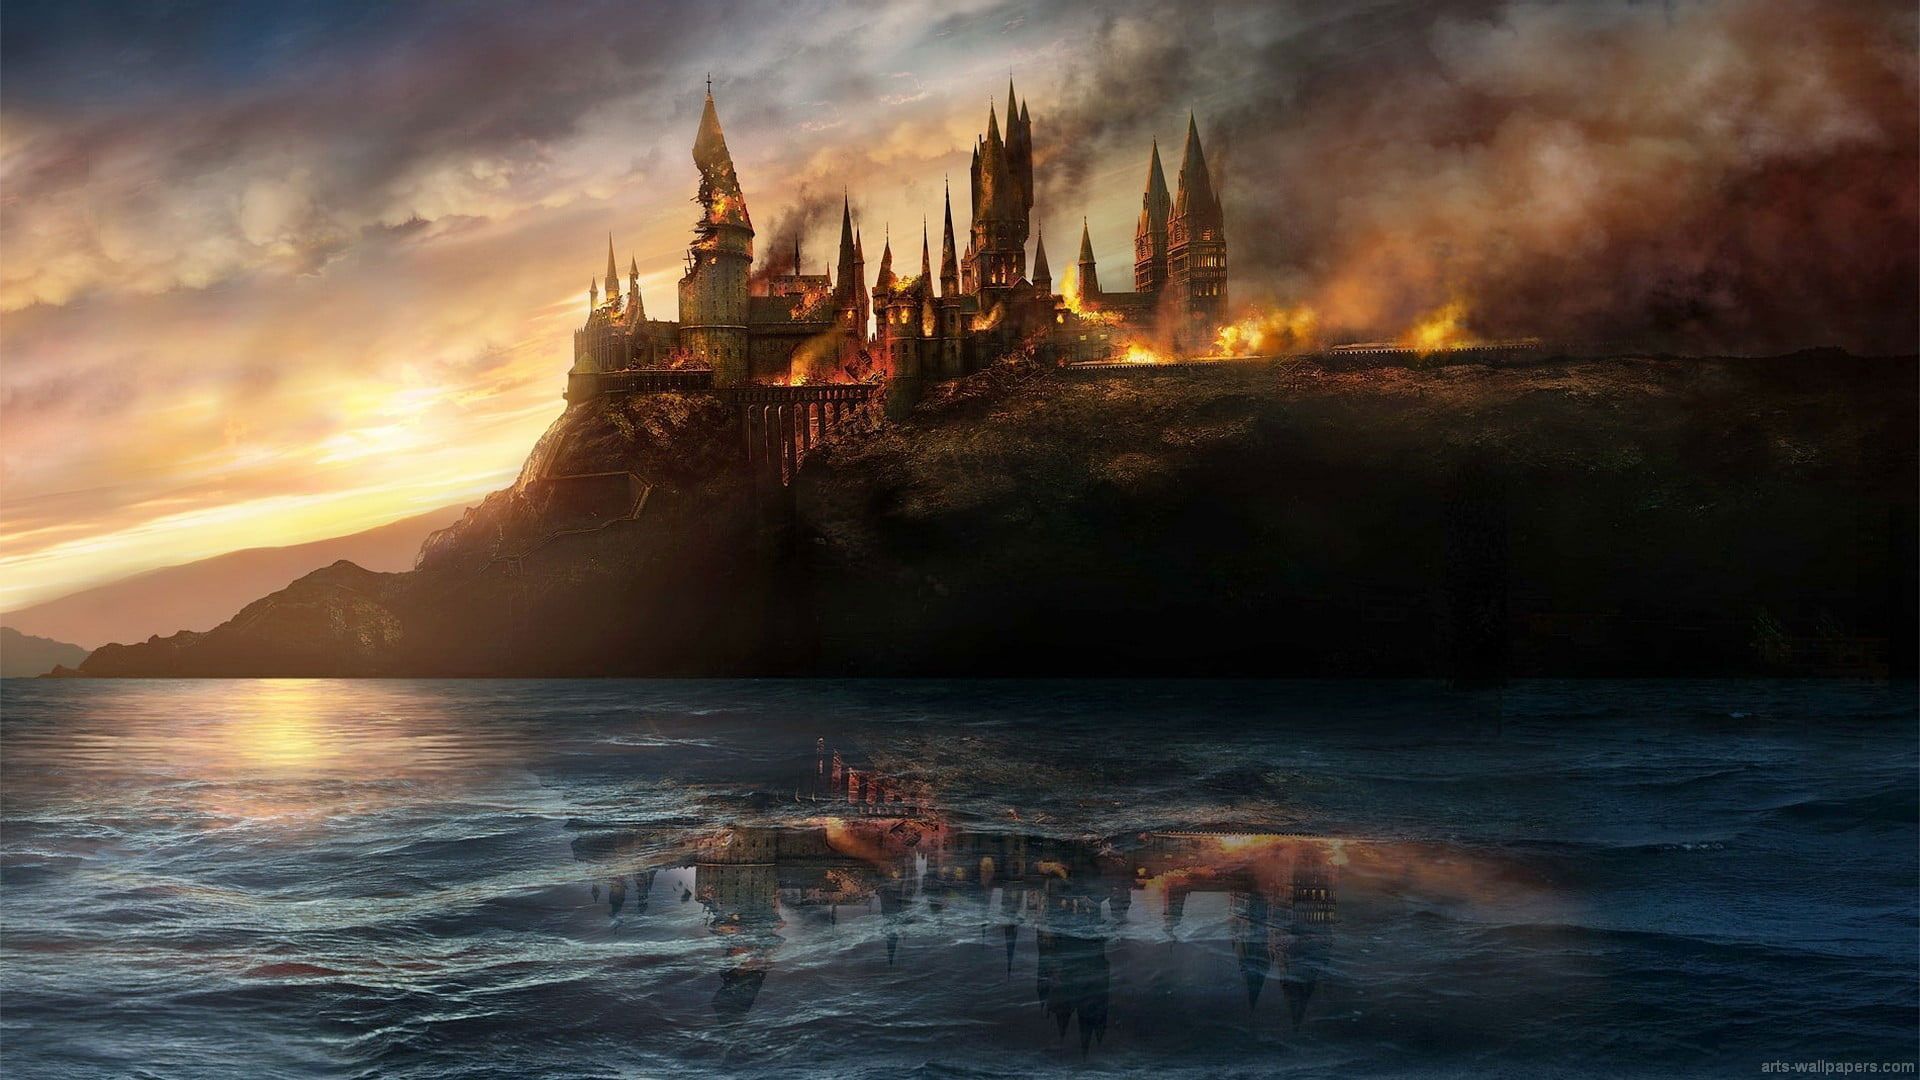 Hogwarts castle on fire, Harry Potter and the Deathly Hallows wallpaper - Hogwarts